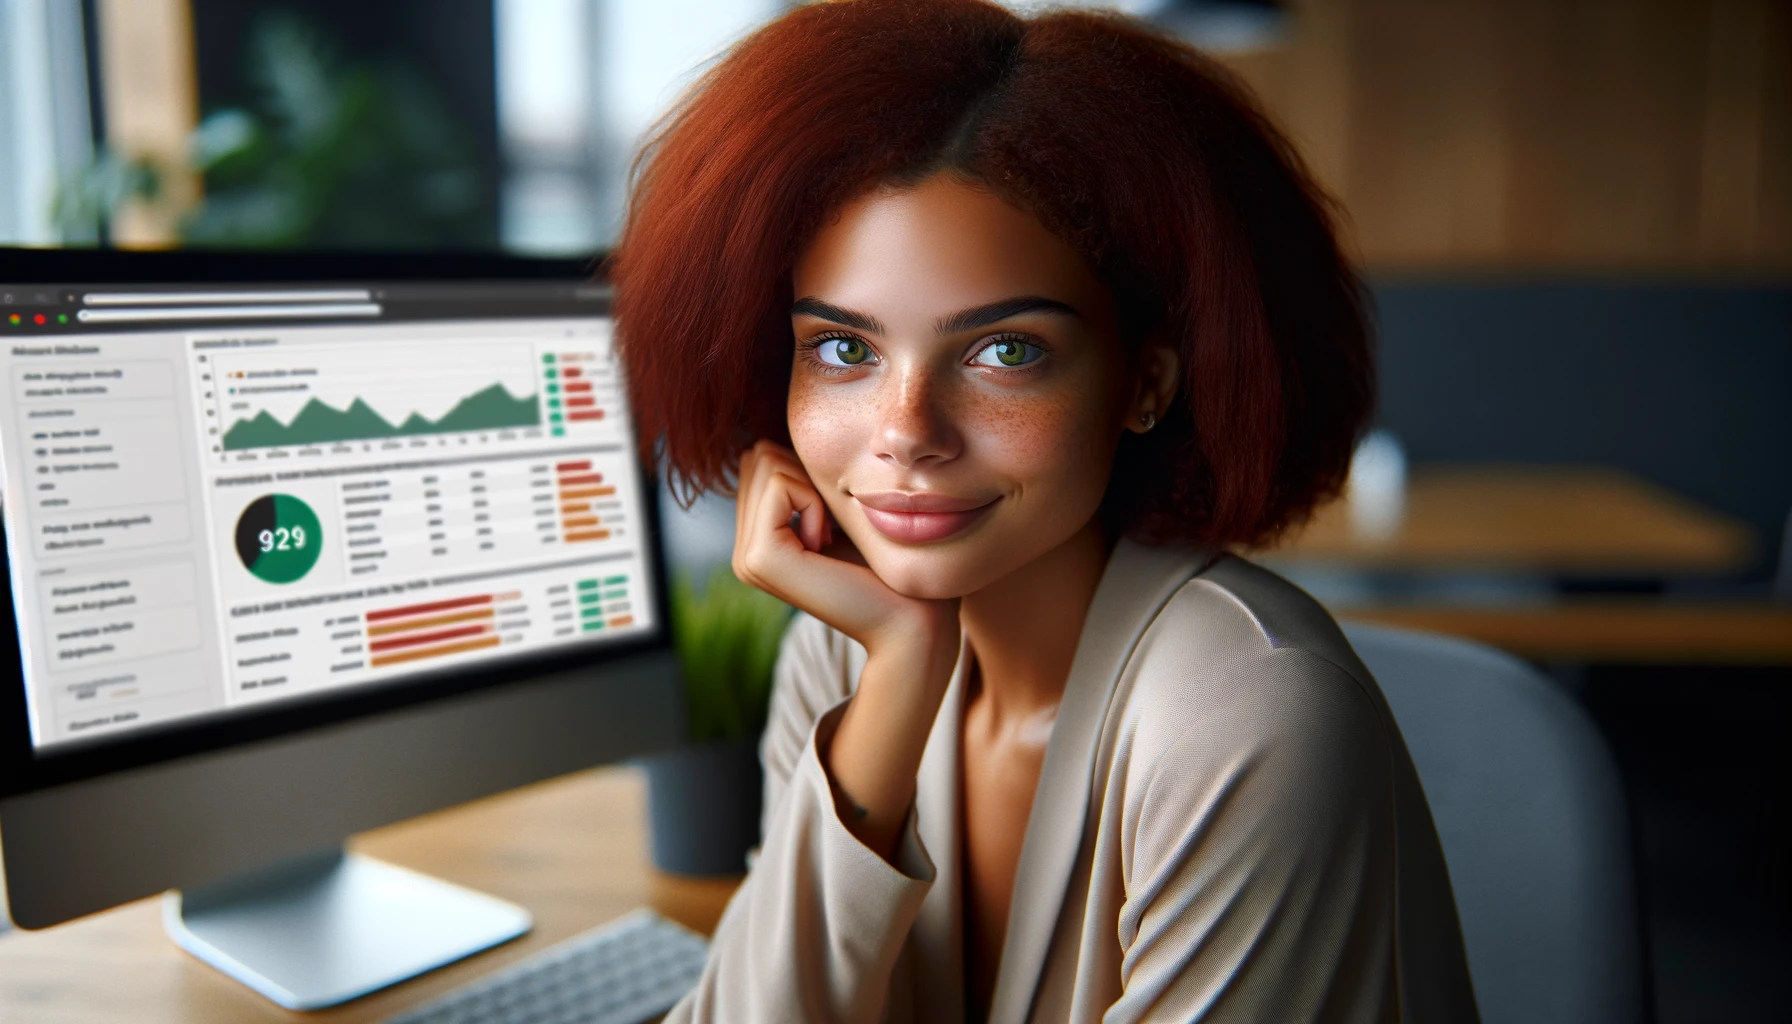 A mixed-race young woman with naturally styled red hair and green eyes is sitting in a modern office space, looking directly at the camera with a content and relaxed expression. She is analyzing a website using SEO tools on her computer, which displays an interface resembling Moz Pro with various SEO metrics and analysis tools. Her demeanor reflects satisfaction and ease in her digital marketing work. The scene is photorealistic, capturing her in a comfortable and professional office environment.